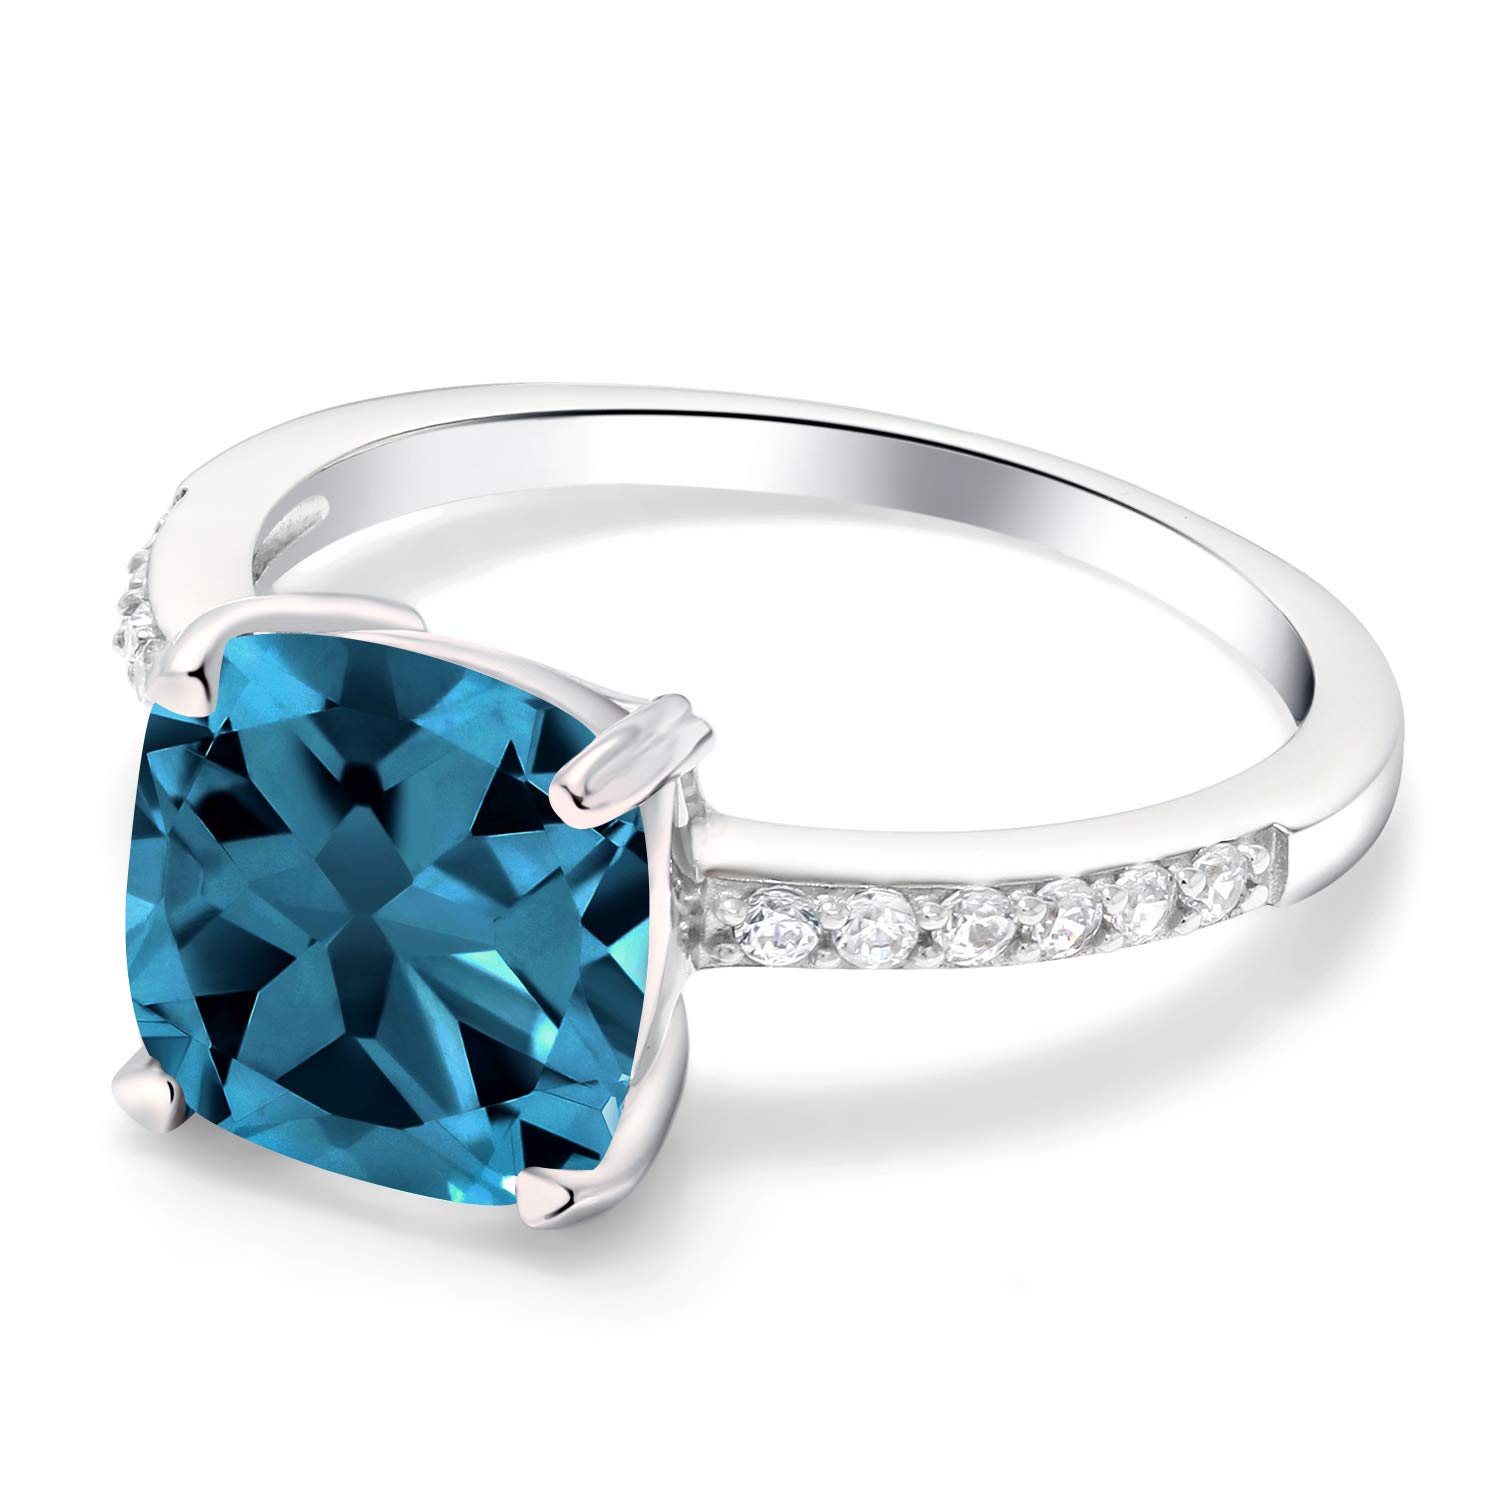 Gem Stone King 925 Sterling Silver London Blue Topaz Engagement Ring For Women (2.86 Cttw, Cushion Cut 8MM, Gemstone Birthstone, Available In Size 5,6,7,8,9)